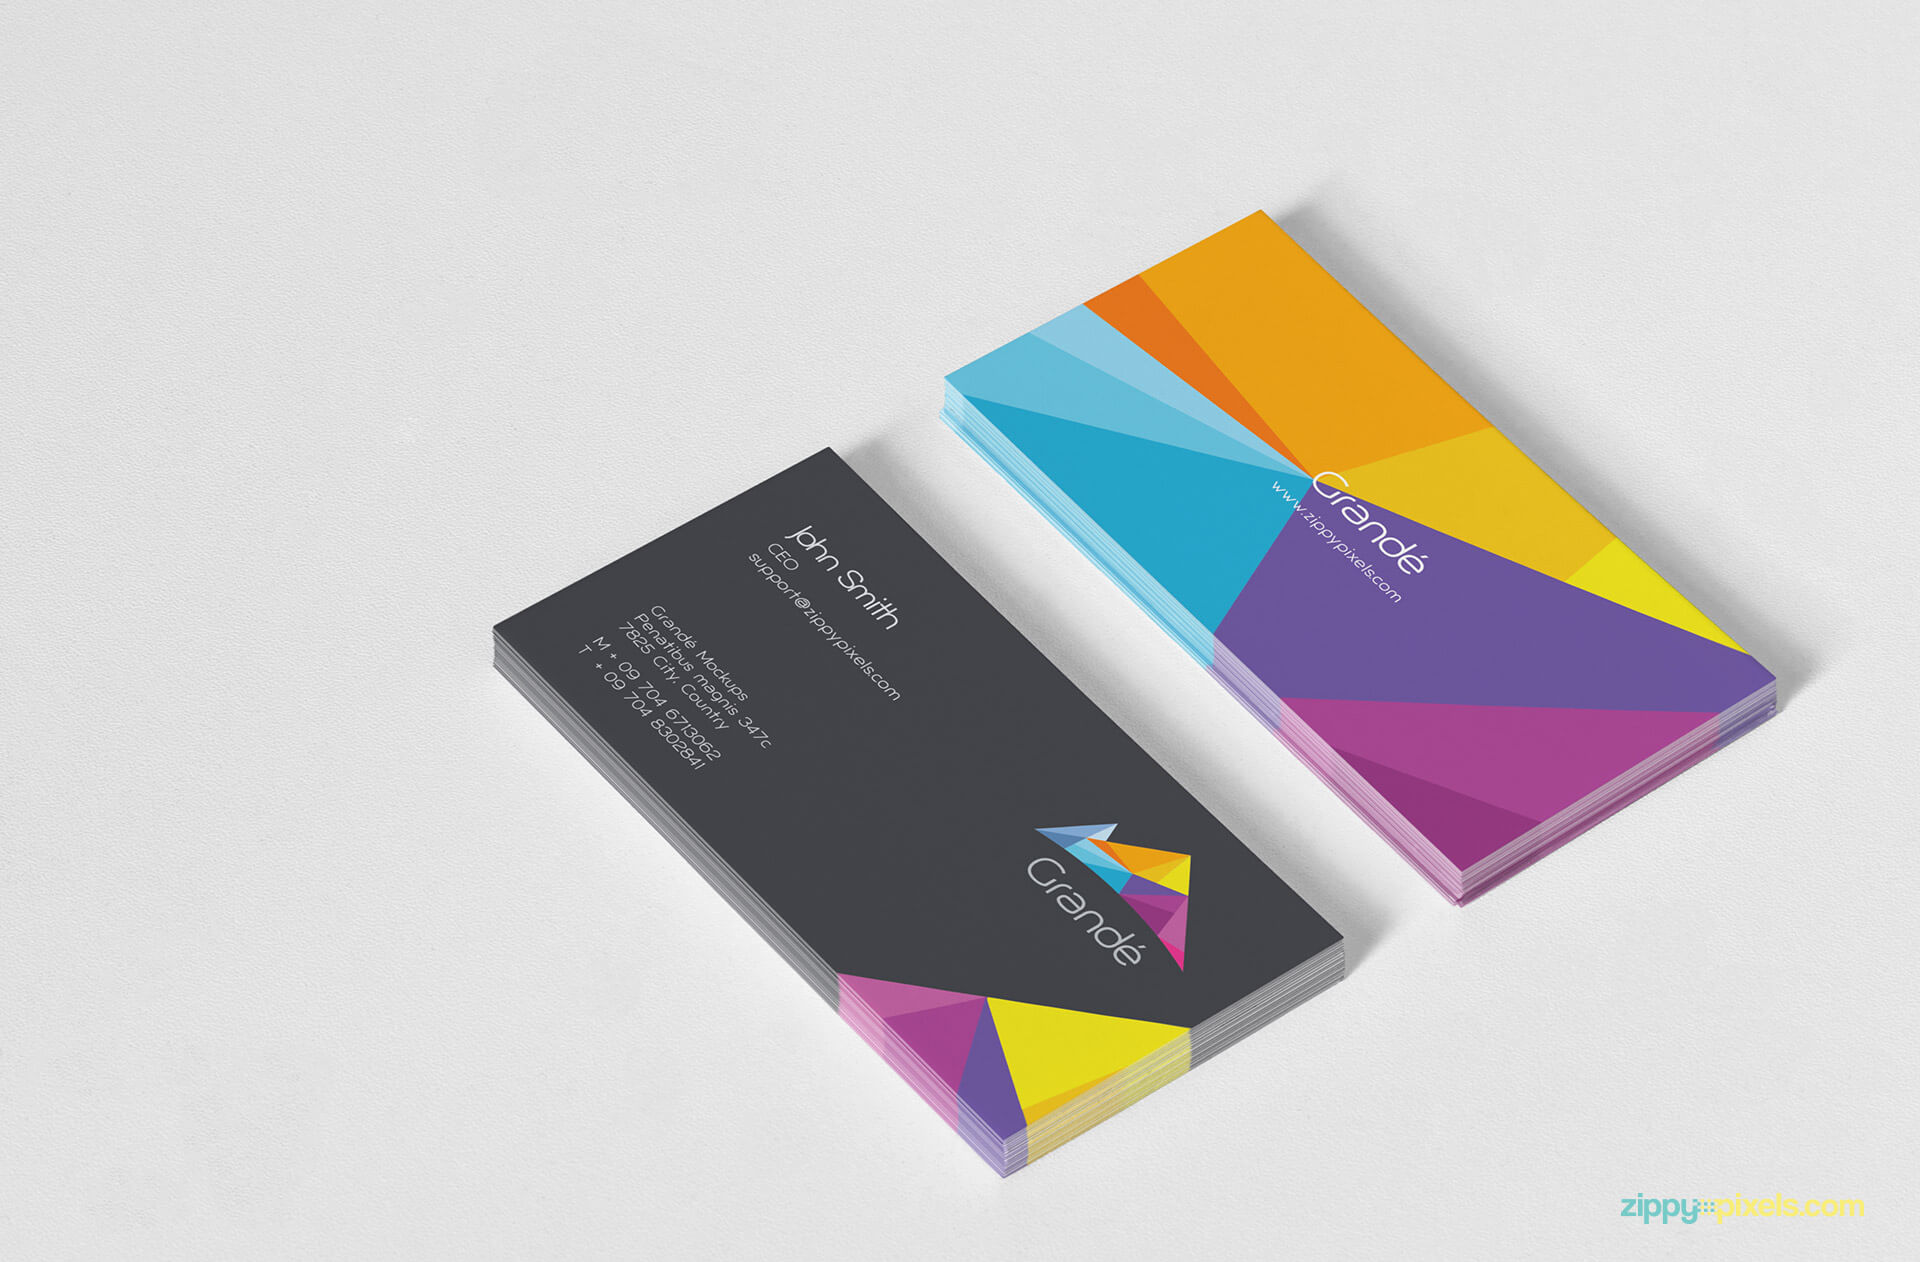 Two Stacks of Business Cards Mockup